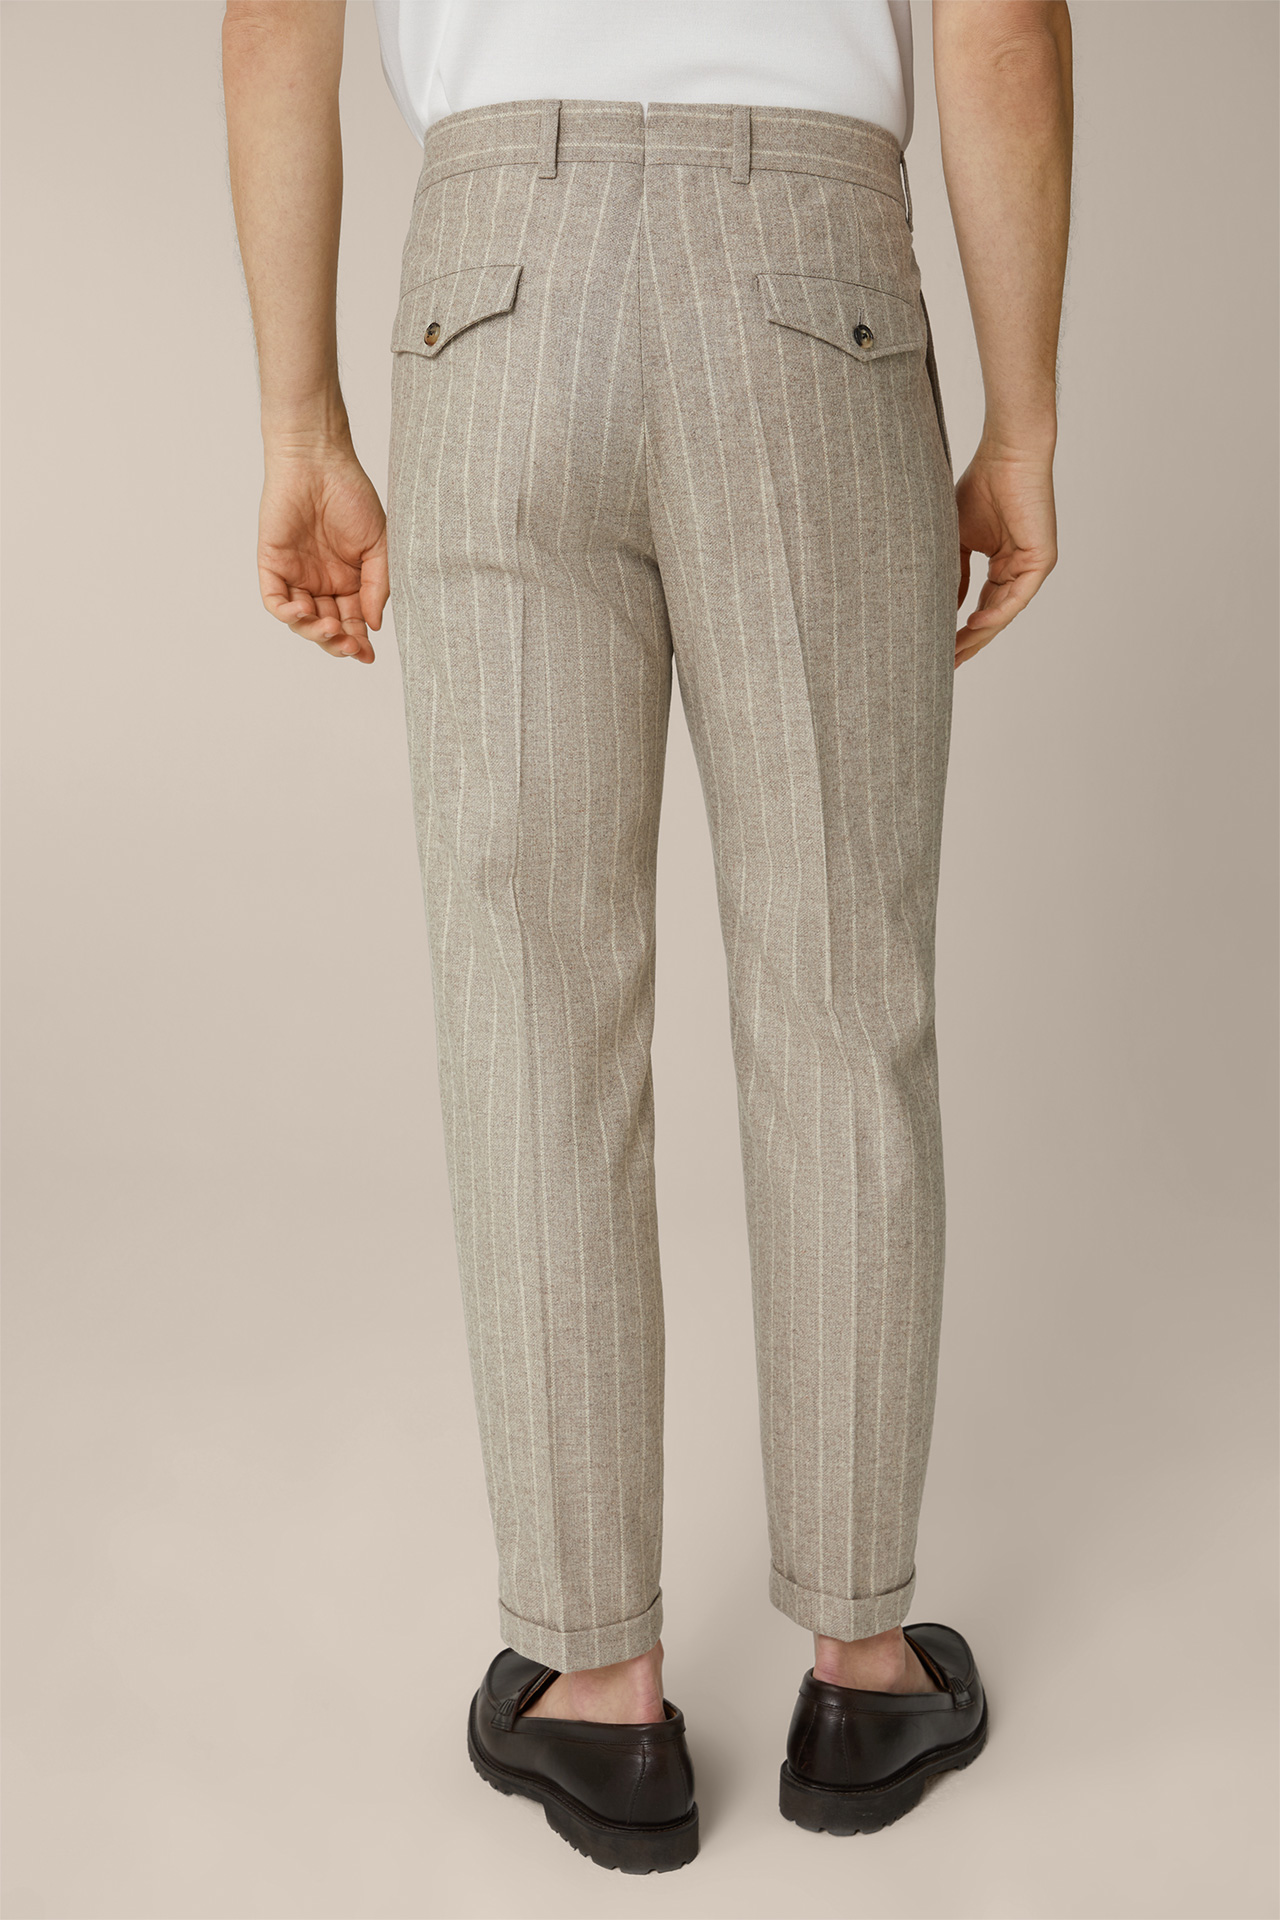 Serpo Flannel Modular Trousers in Brown with Chalk Stripes